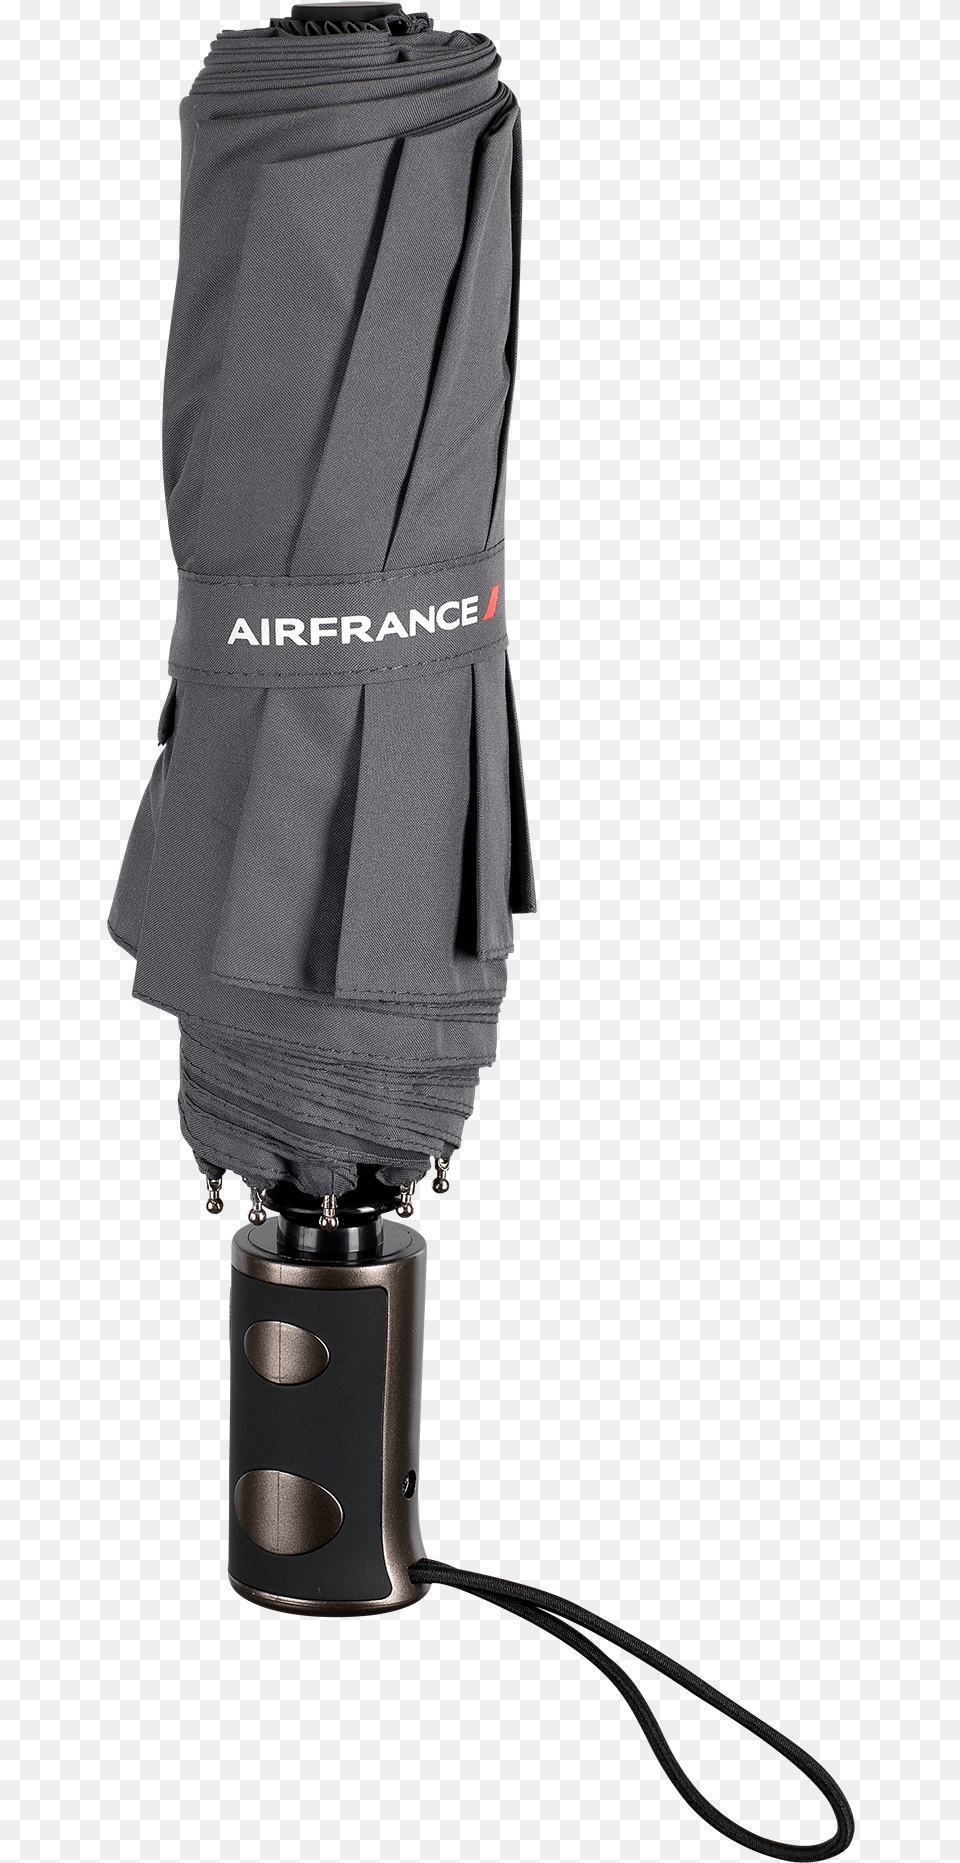 Folding Automatic Umbrella Air France, Electrical Device, Microphone, Lamp, Light Png